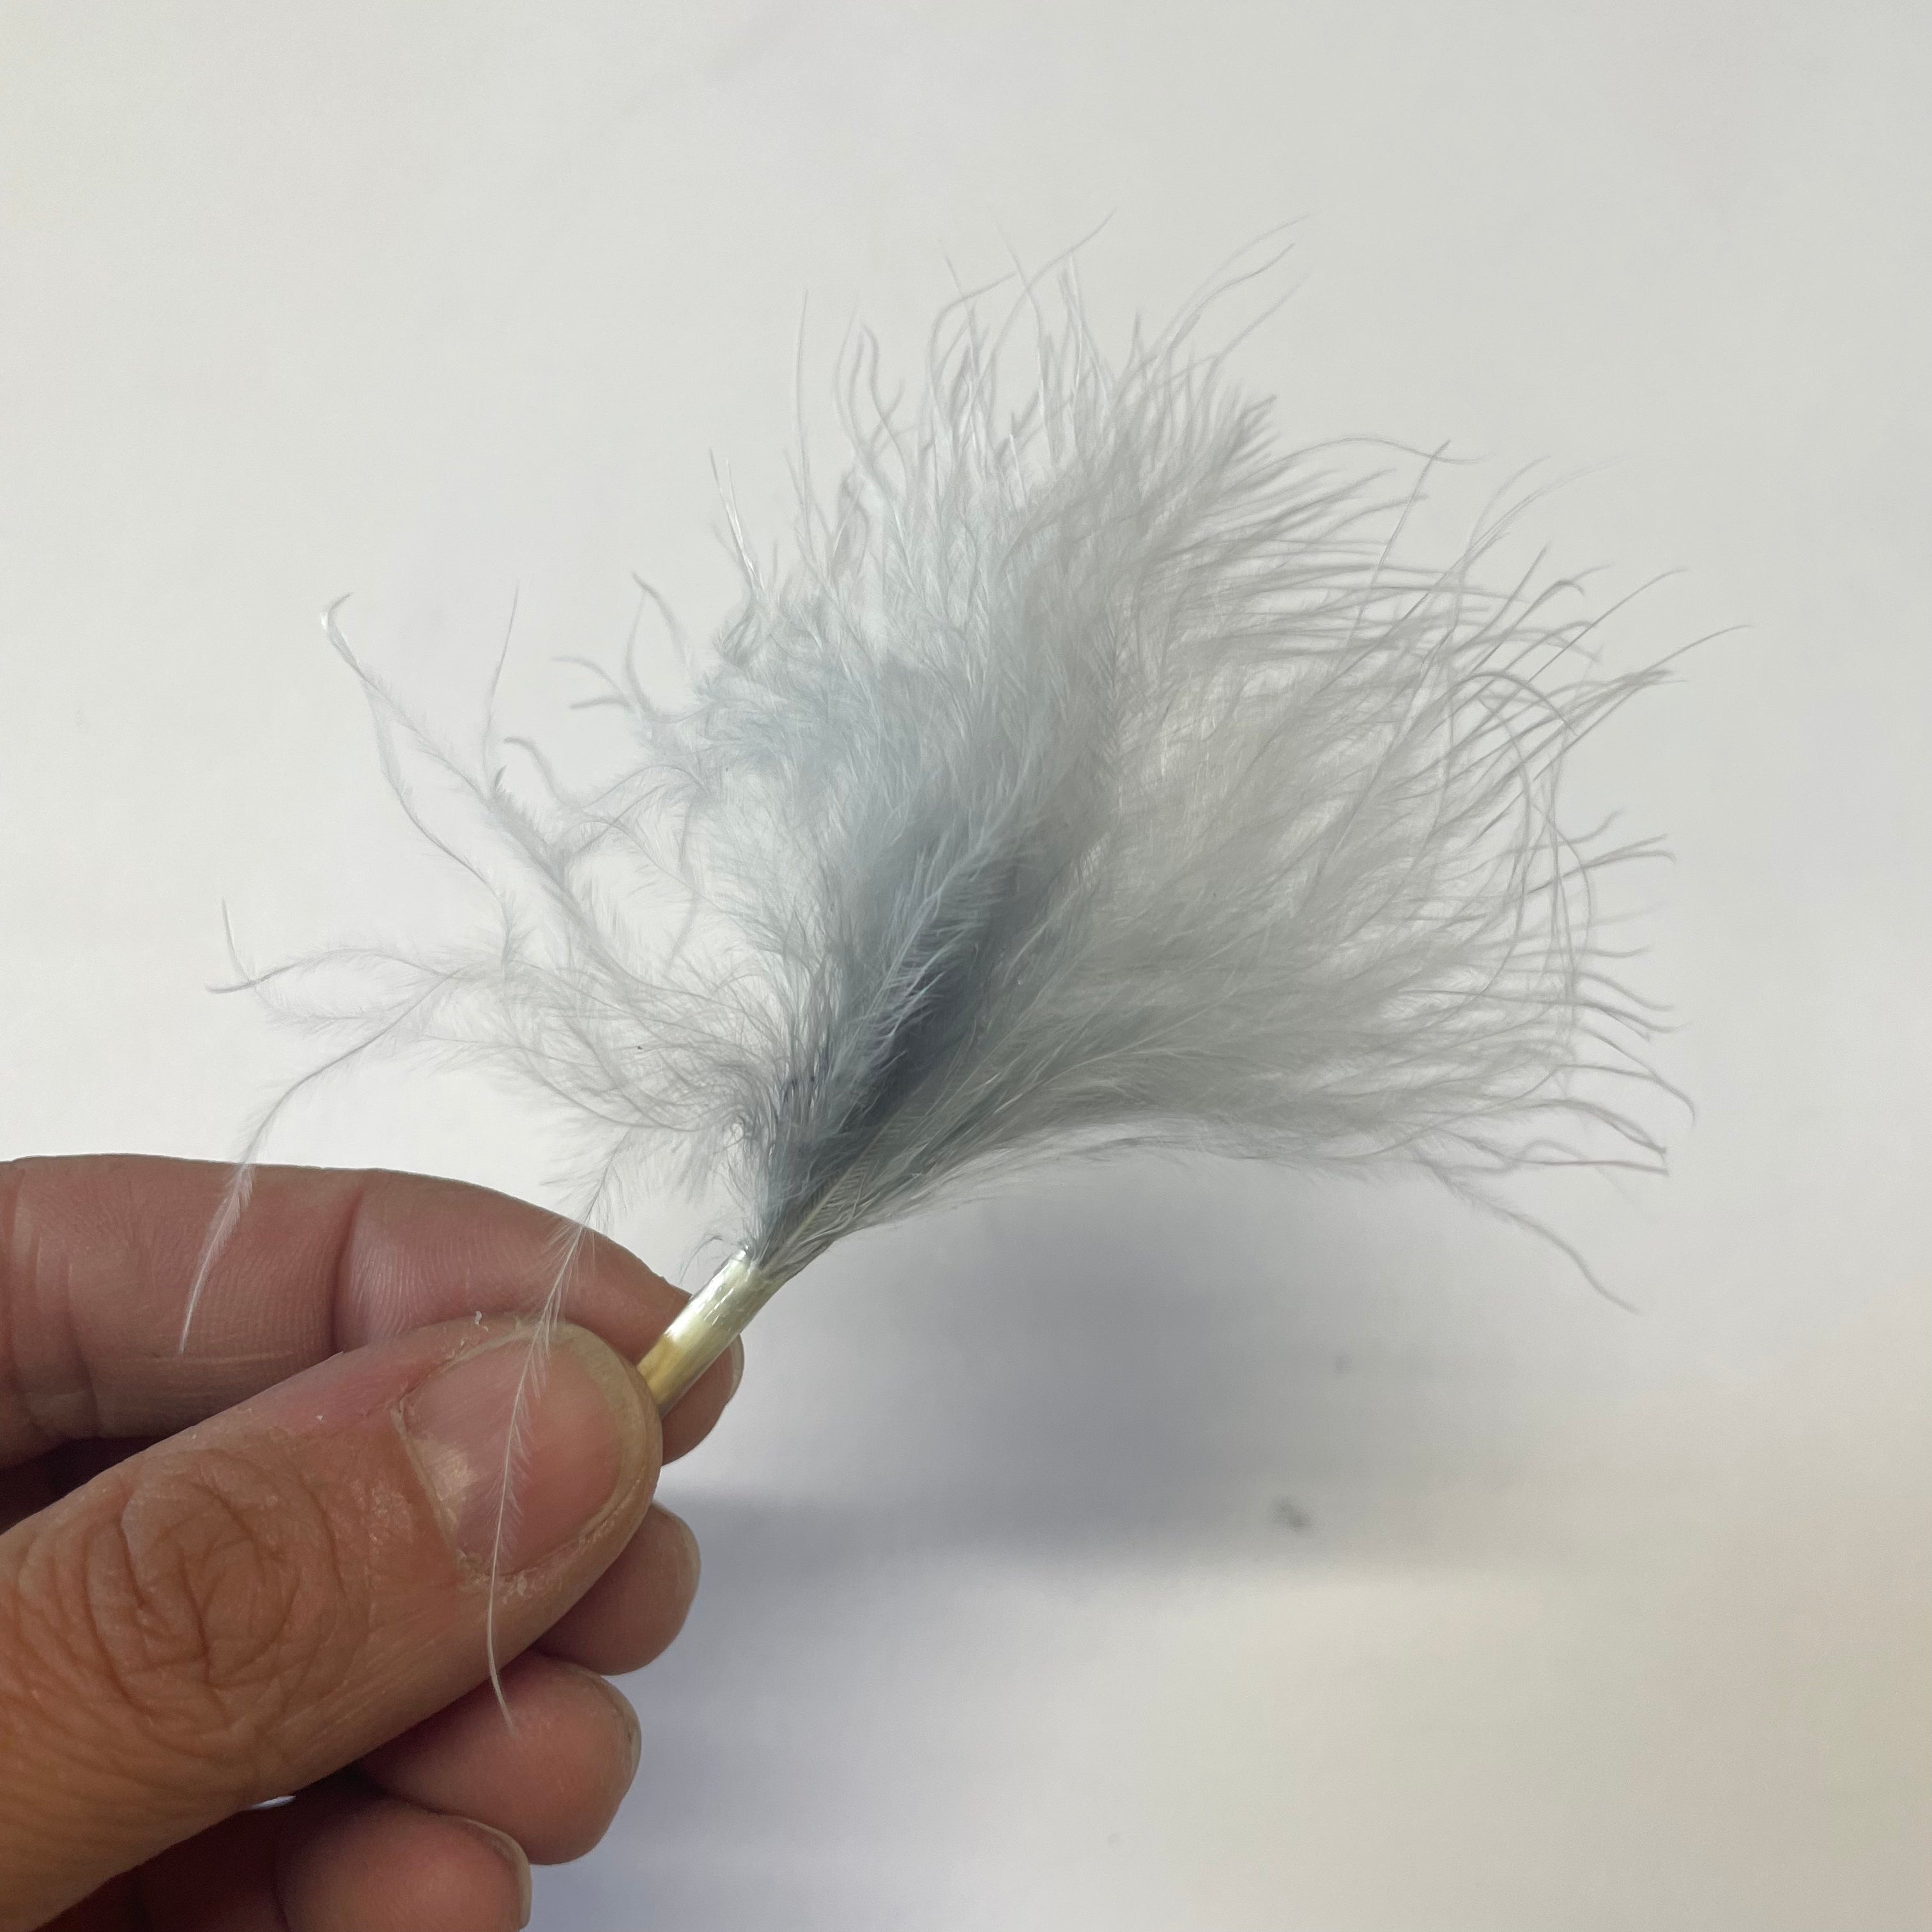 Itty Bitty Marabou Feather Plumage Pack 10 grams - Grey Silver